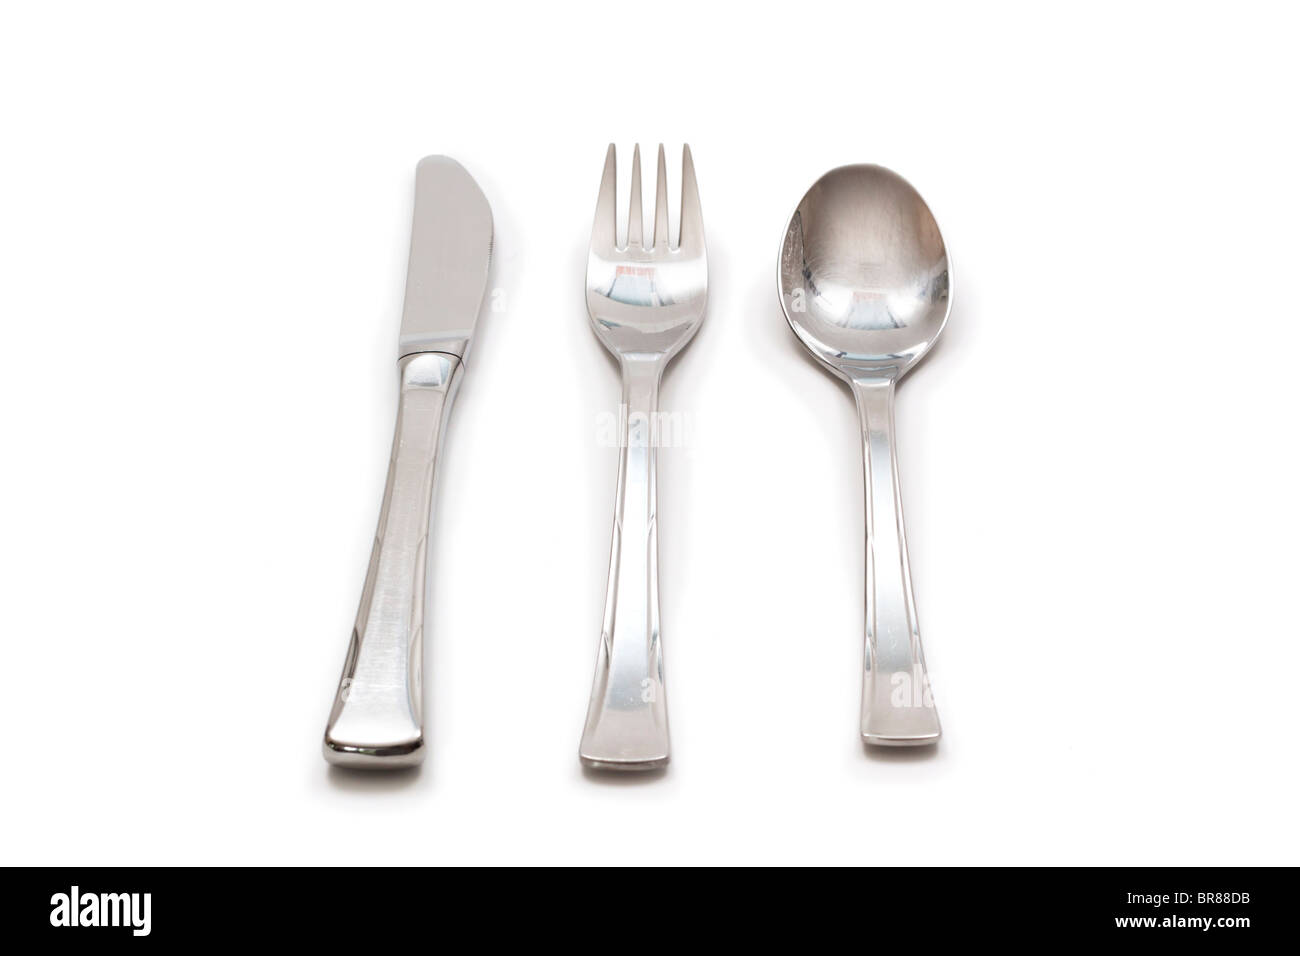 Knife, fork, and spoon Stock Photo